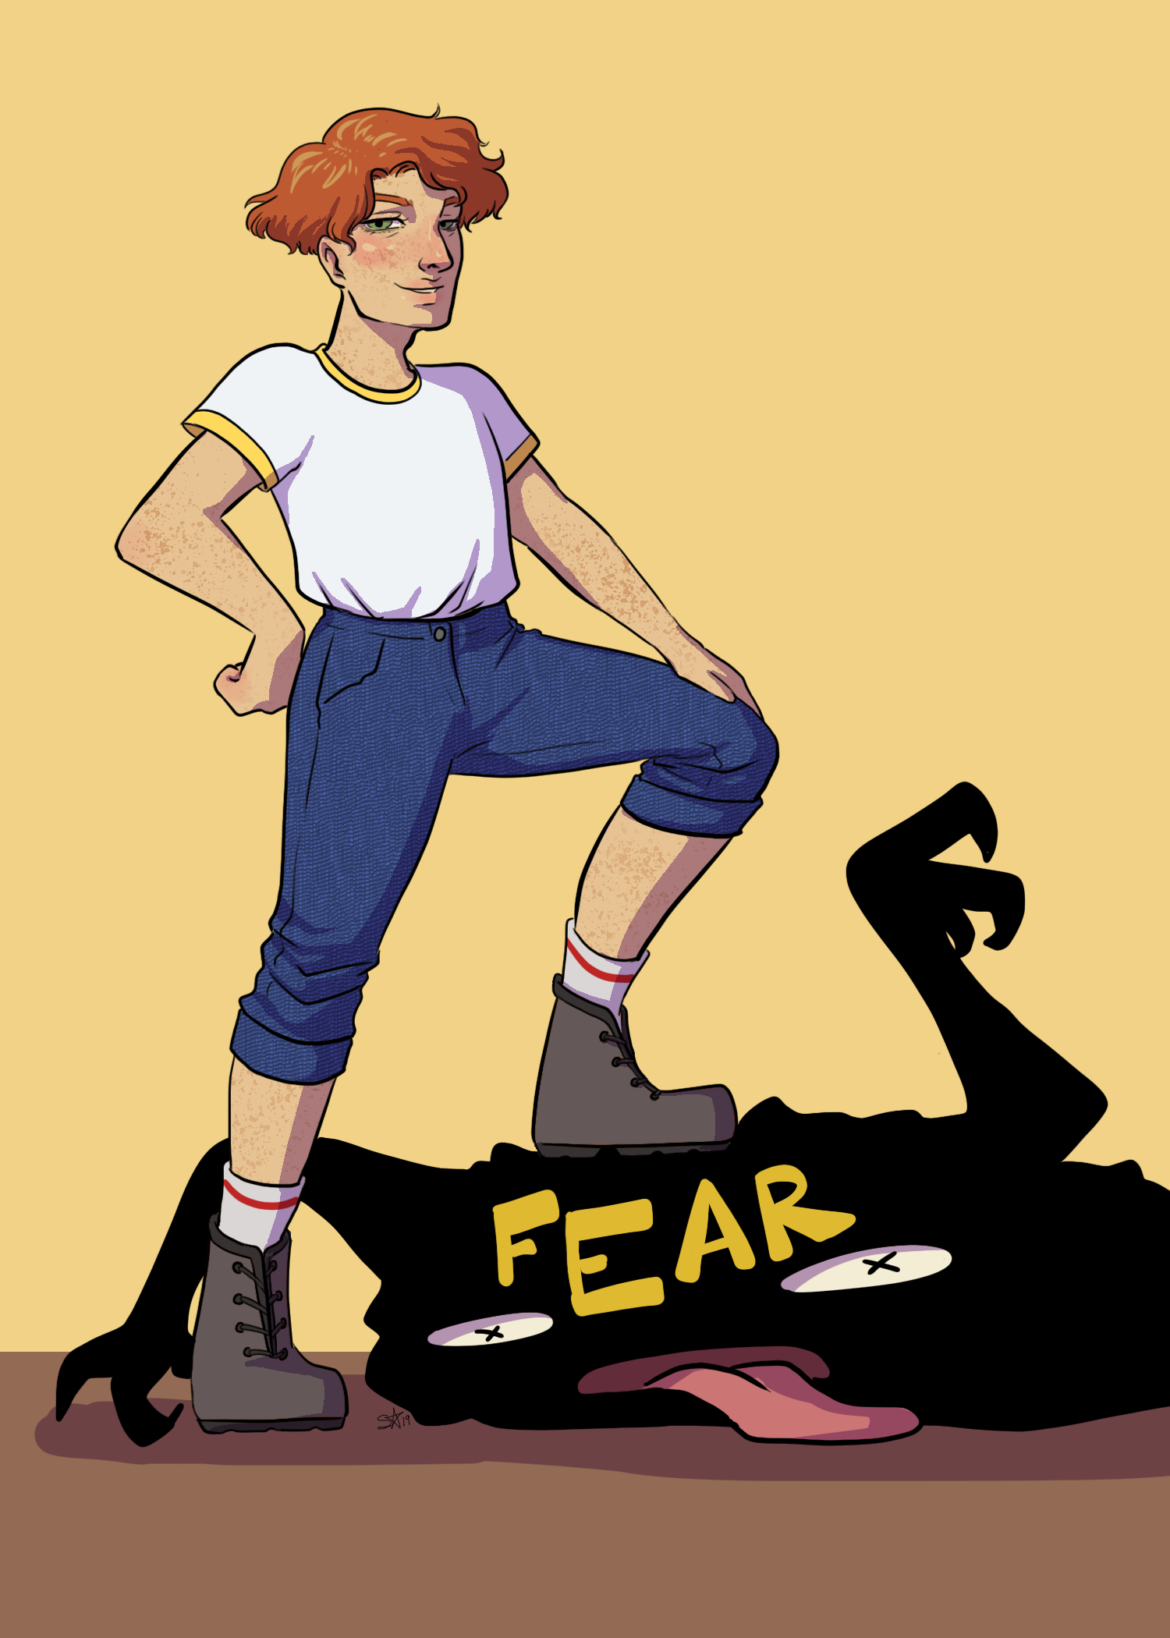 A female figure with her foot on a black object with a FEAR sign on it.